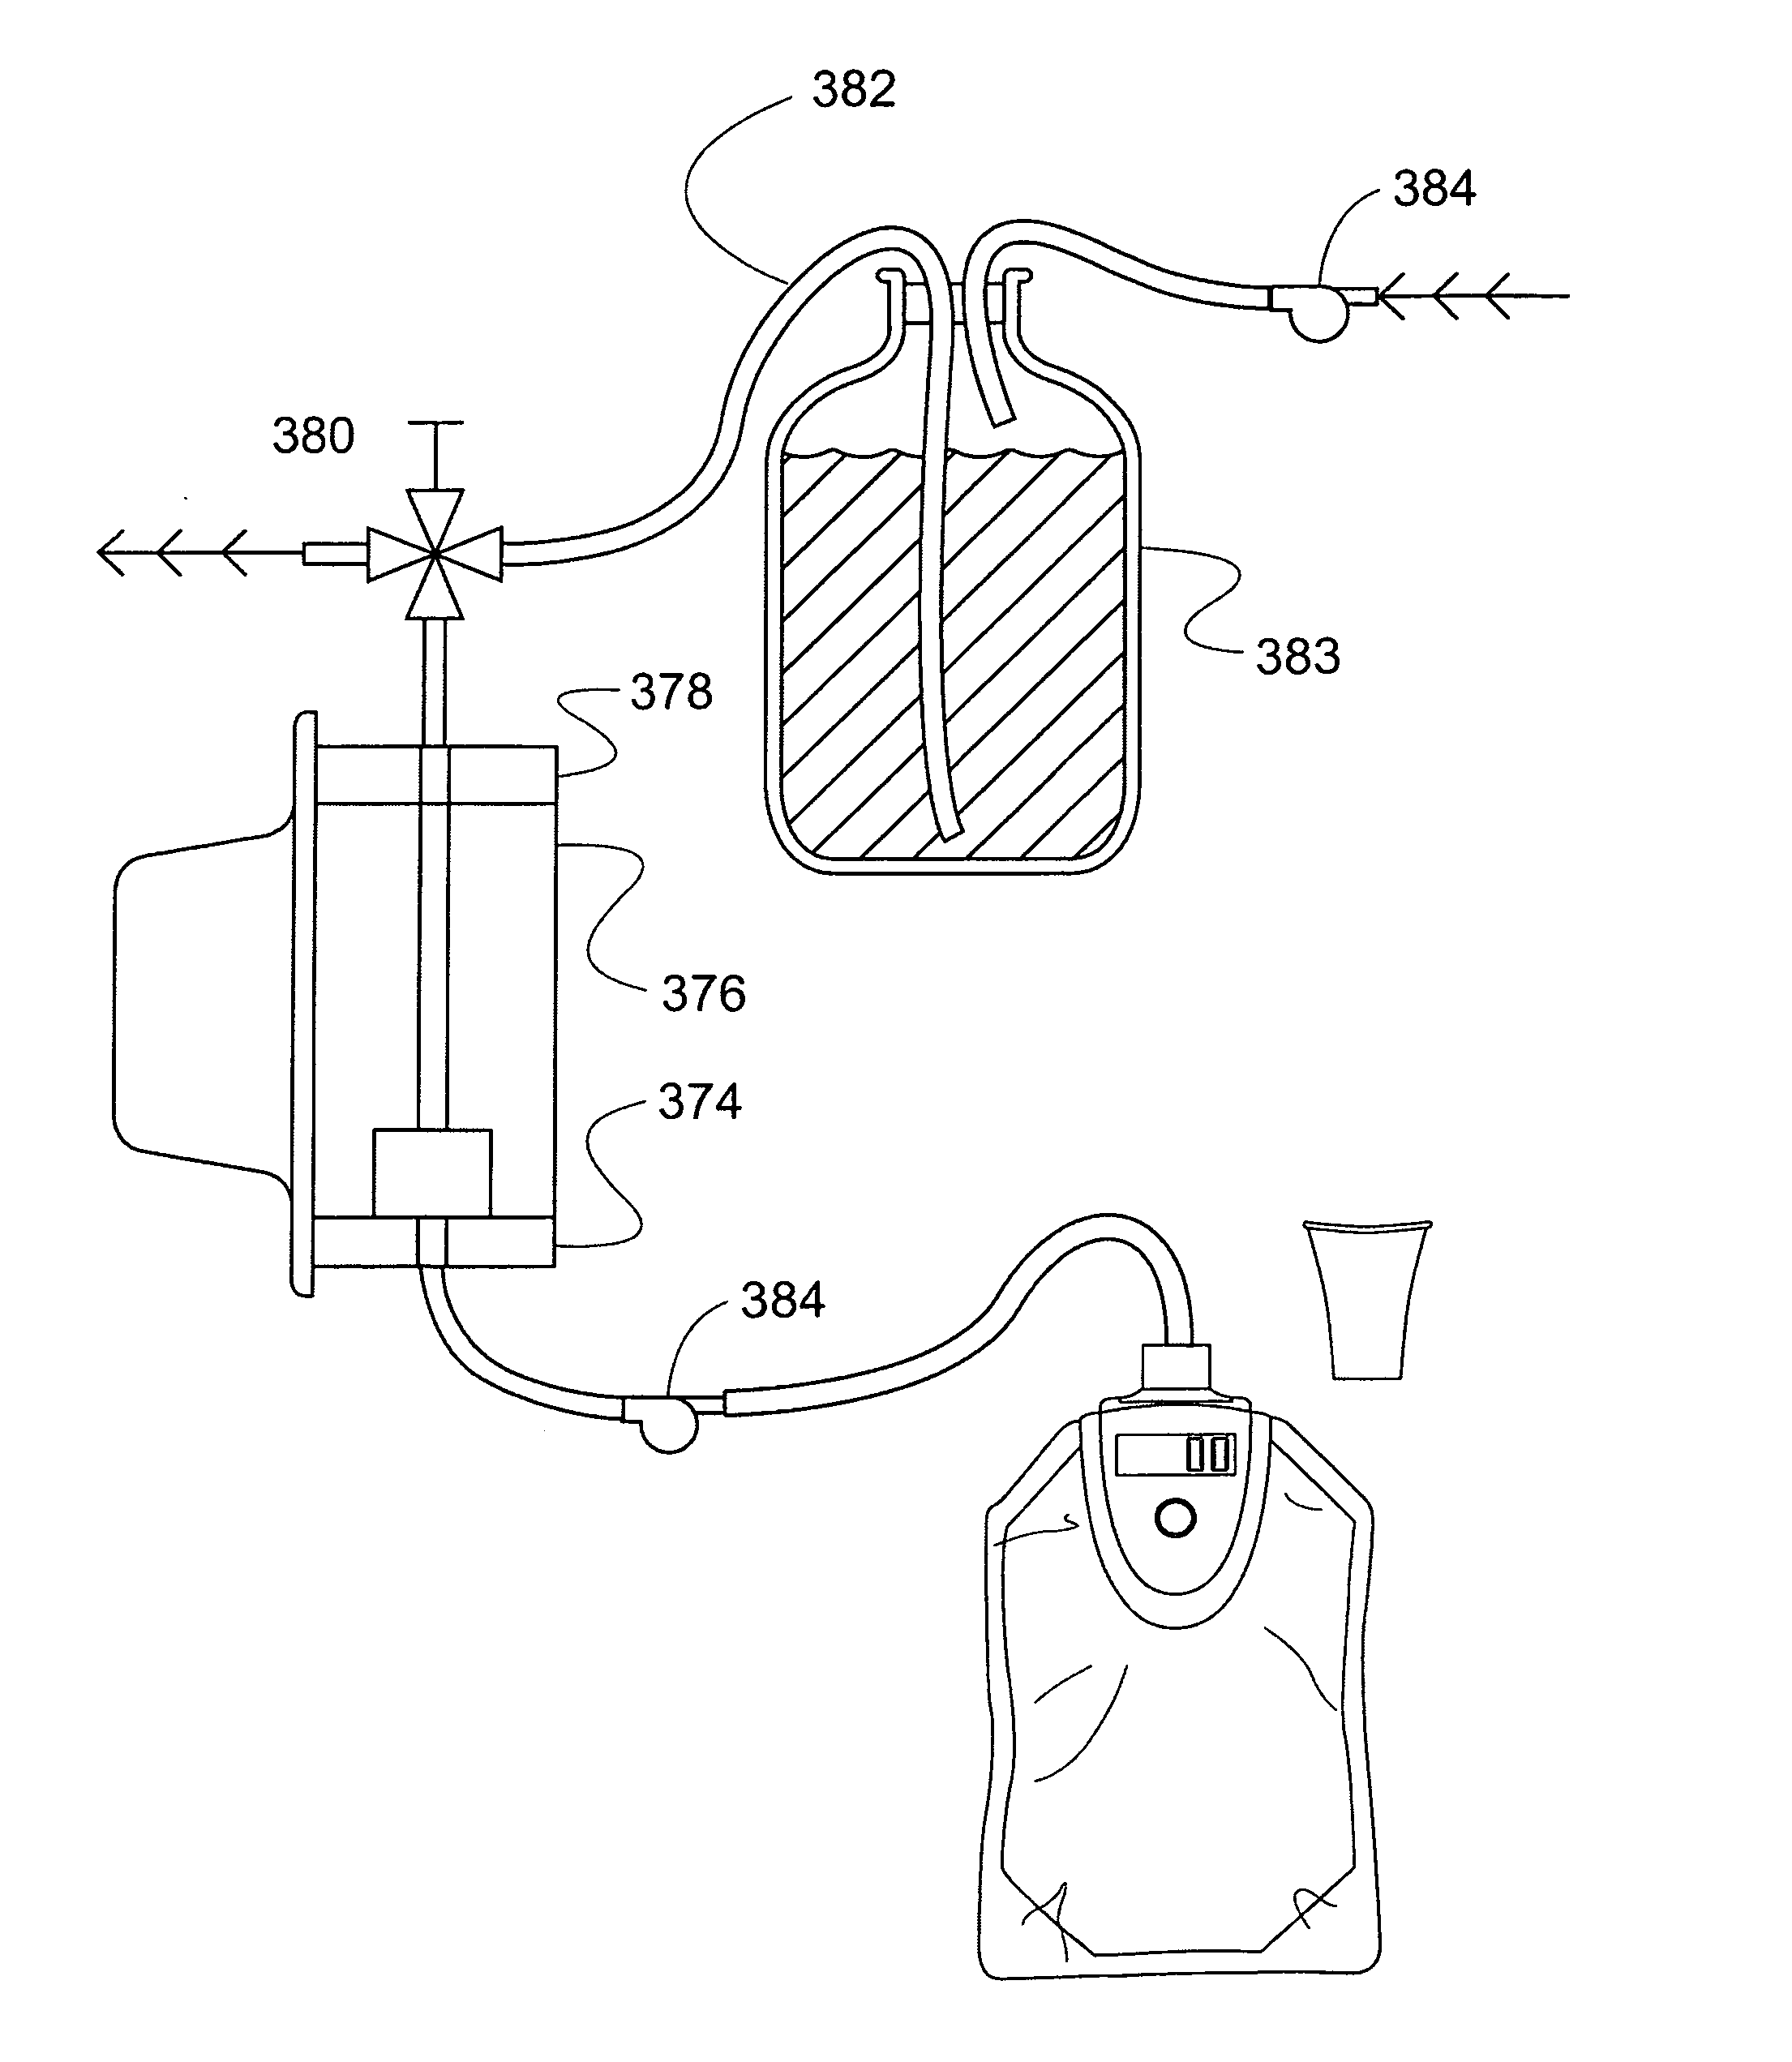 Method and apparatus for analyzing acetone in breath